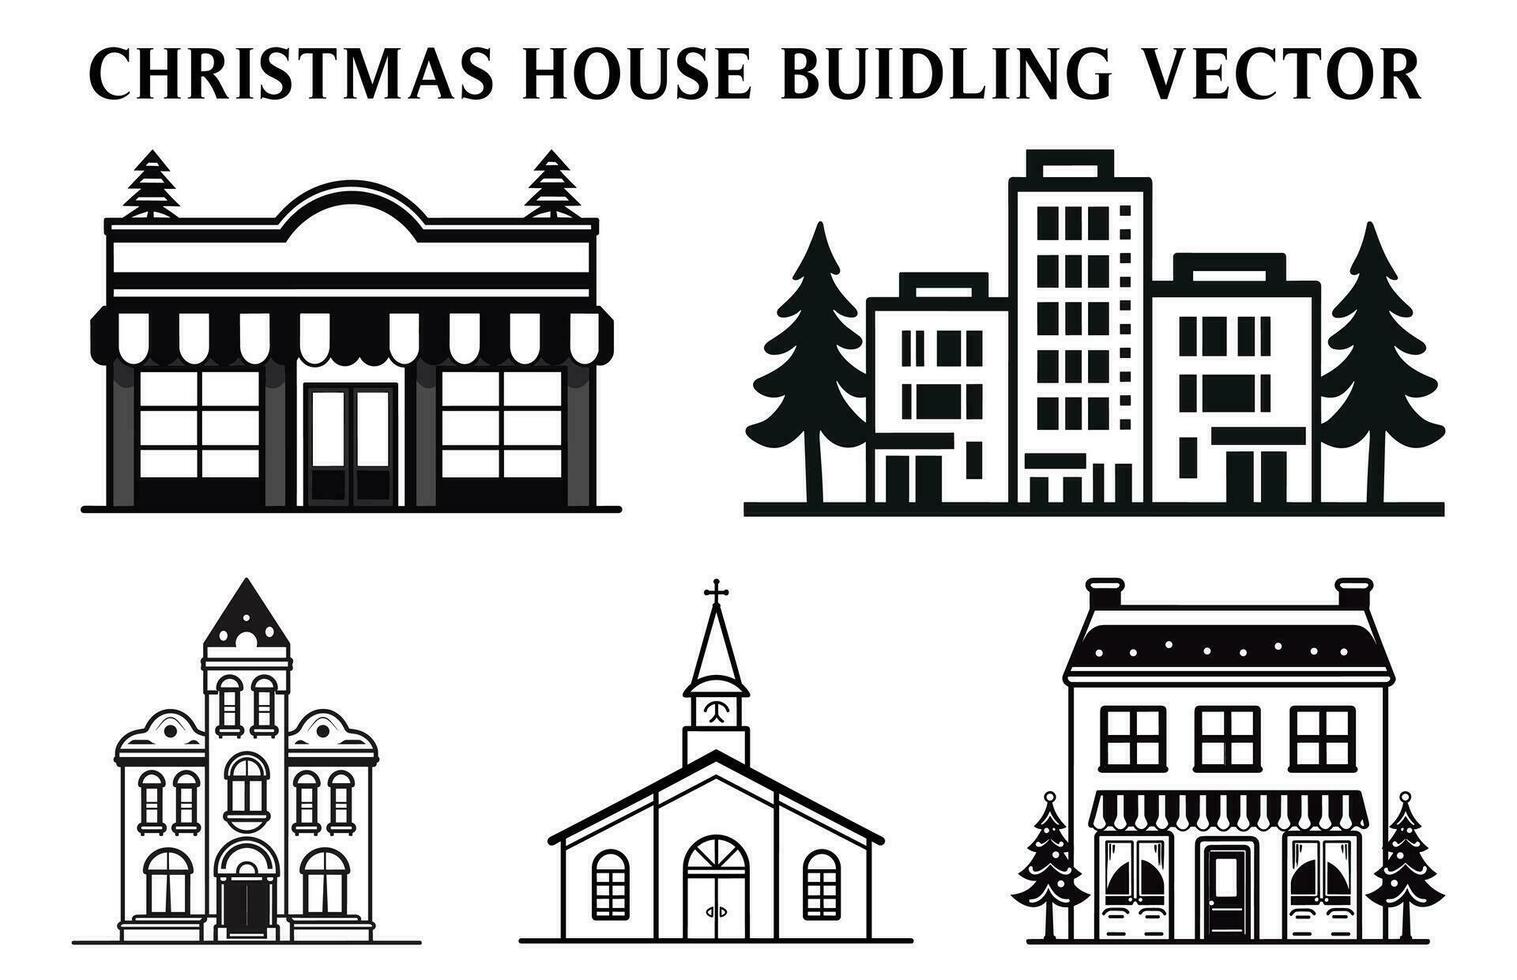 Christmas Village House Silhouette Vector isolated on a white background